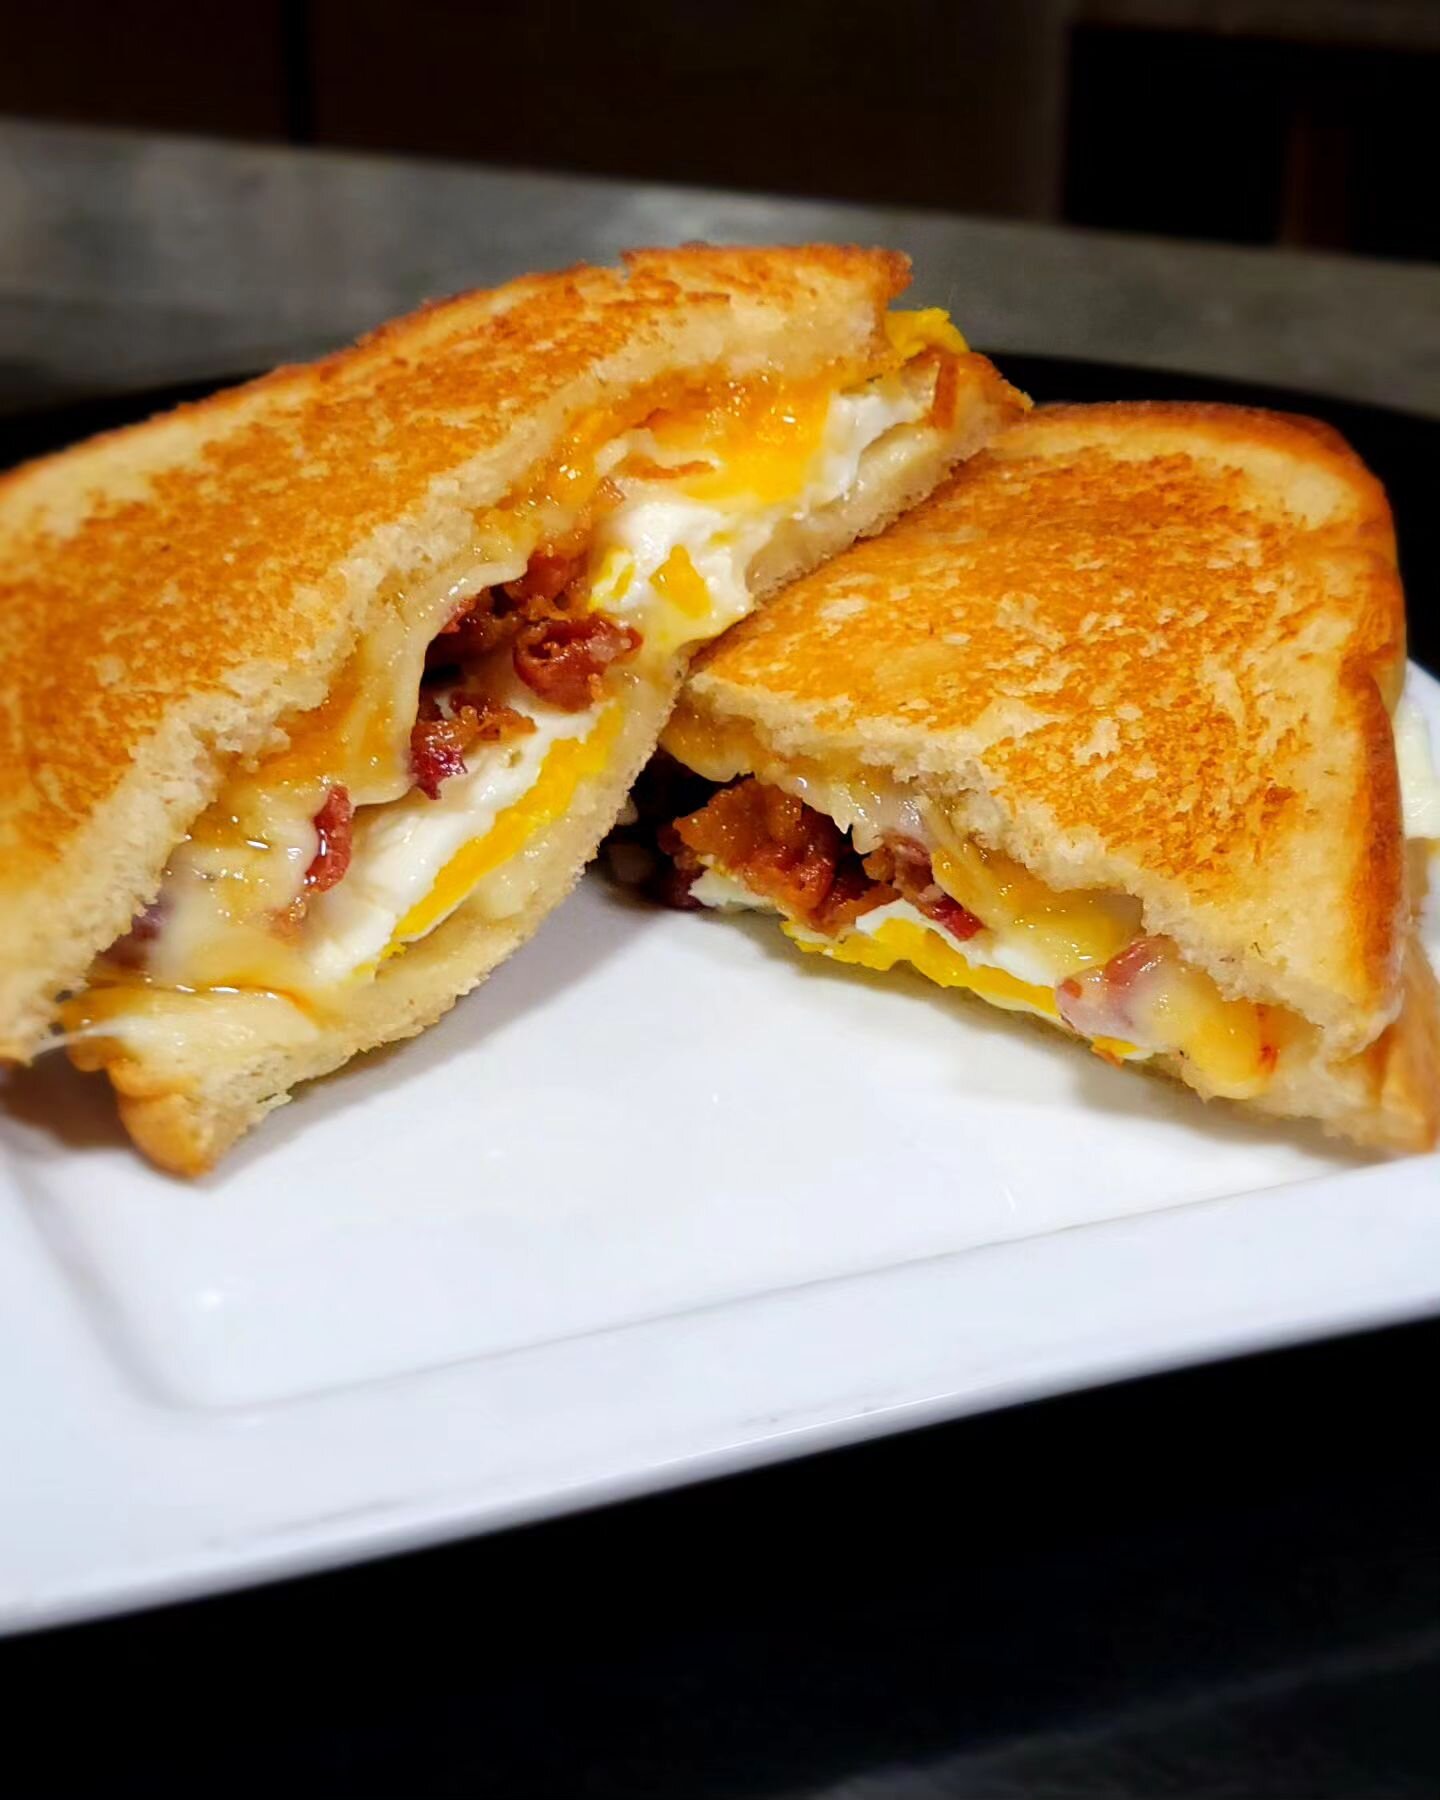 Happy Wednesday and Trivia Night! New specials have rolled out, like Zelda's Grilled Cheese - @sarkozybakery oatmeal bread, jam from @bilberryj_j_kalamazoo (AKA @popcitypopcornkzoo), cheese, bacon and a fried egg.

Come try our other Tears of Kingdom